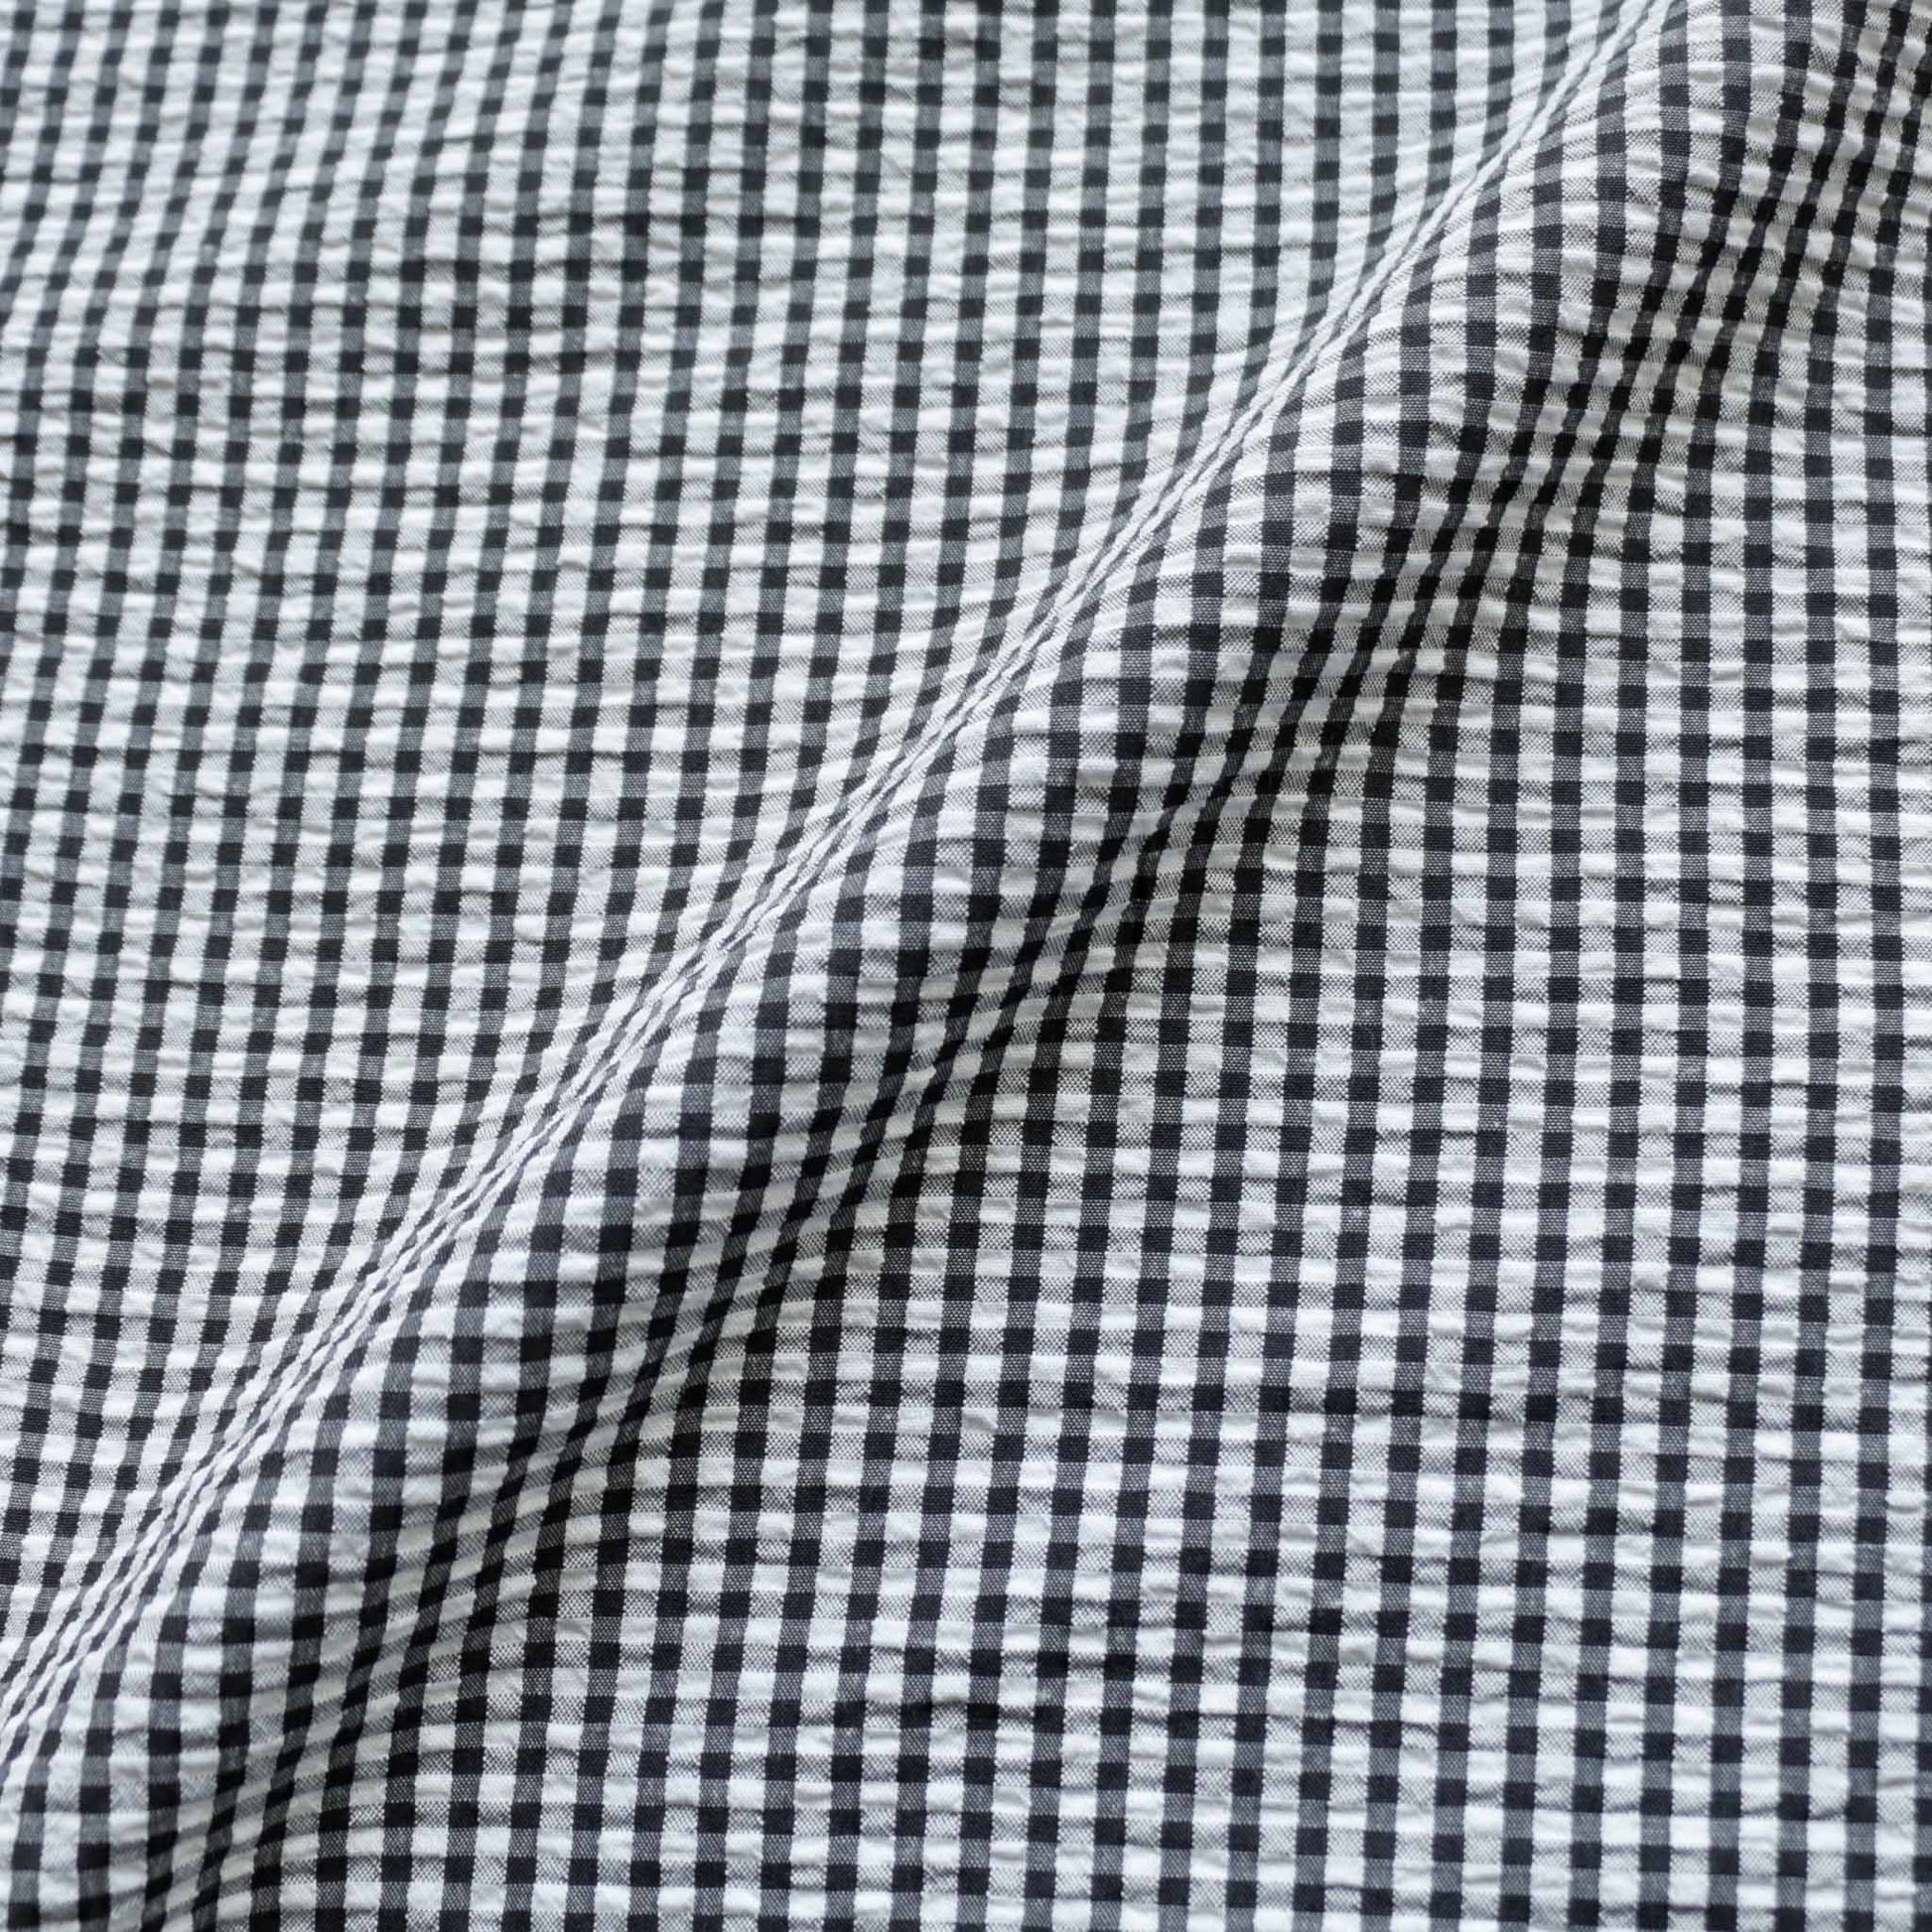 seersucker dressmaking fabric in black and white gingham style 